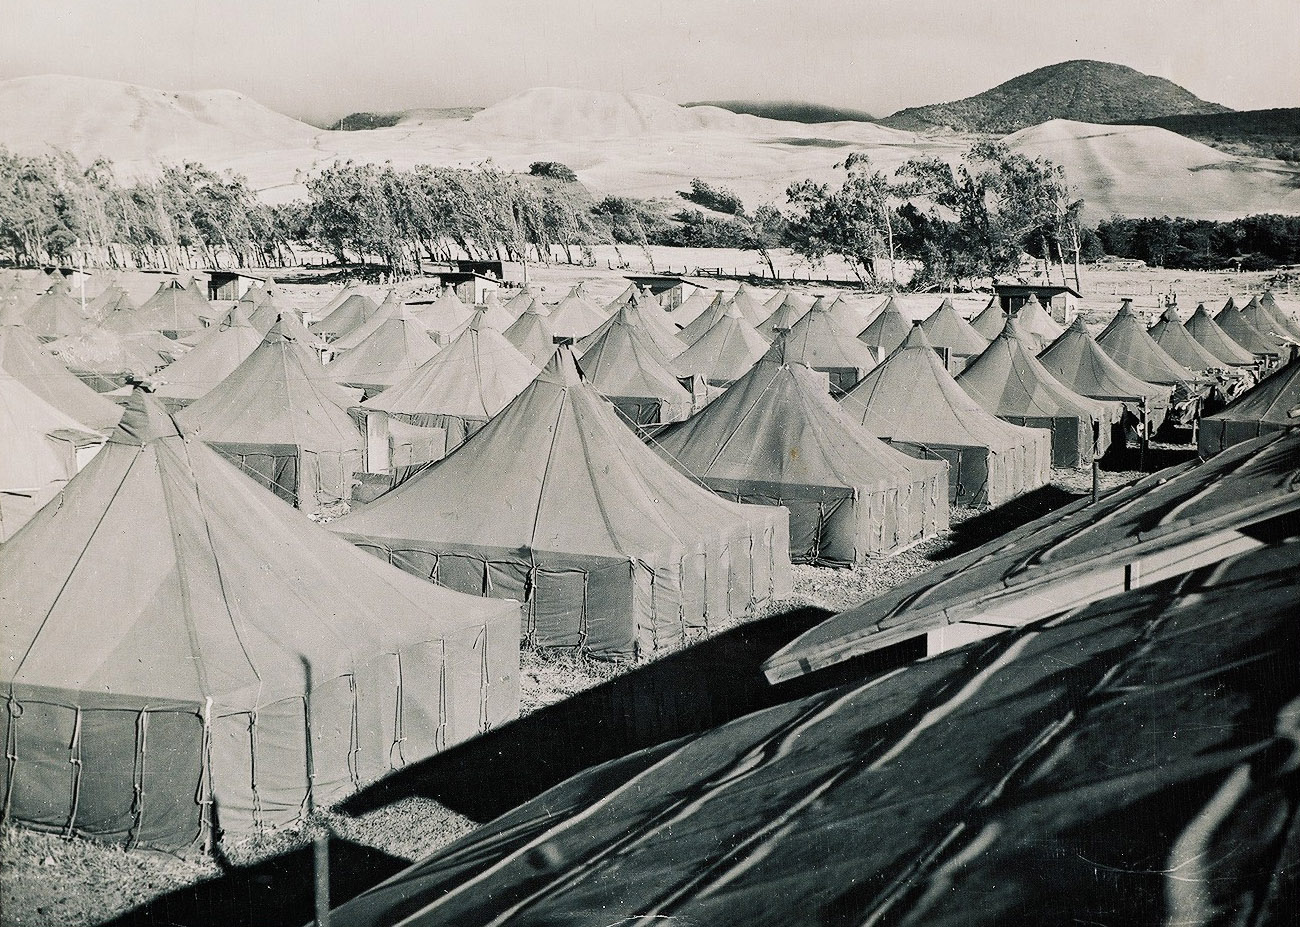 A photo showing tents in Camp Tarawa with the Kohala Mountains in the background.